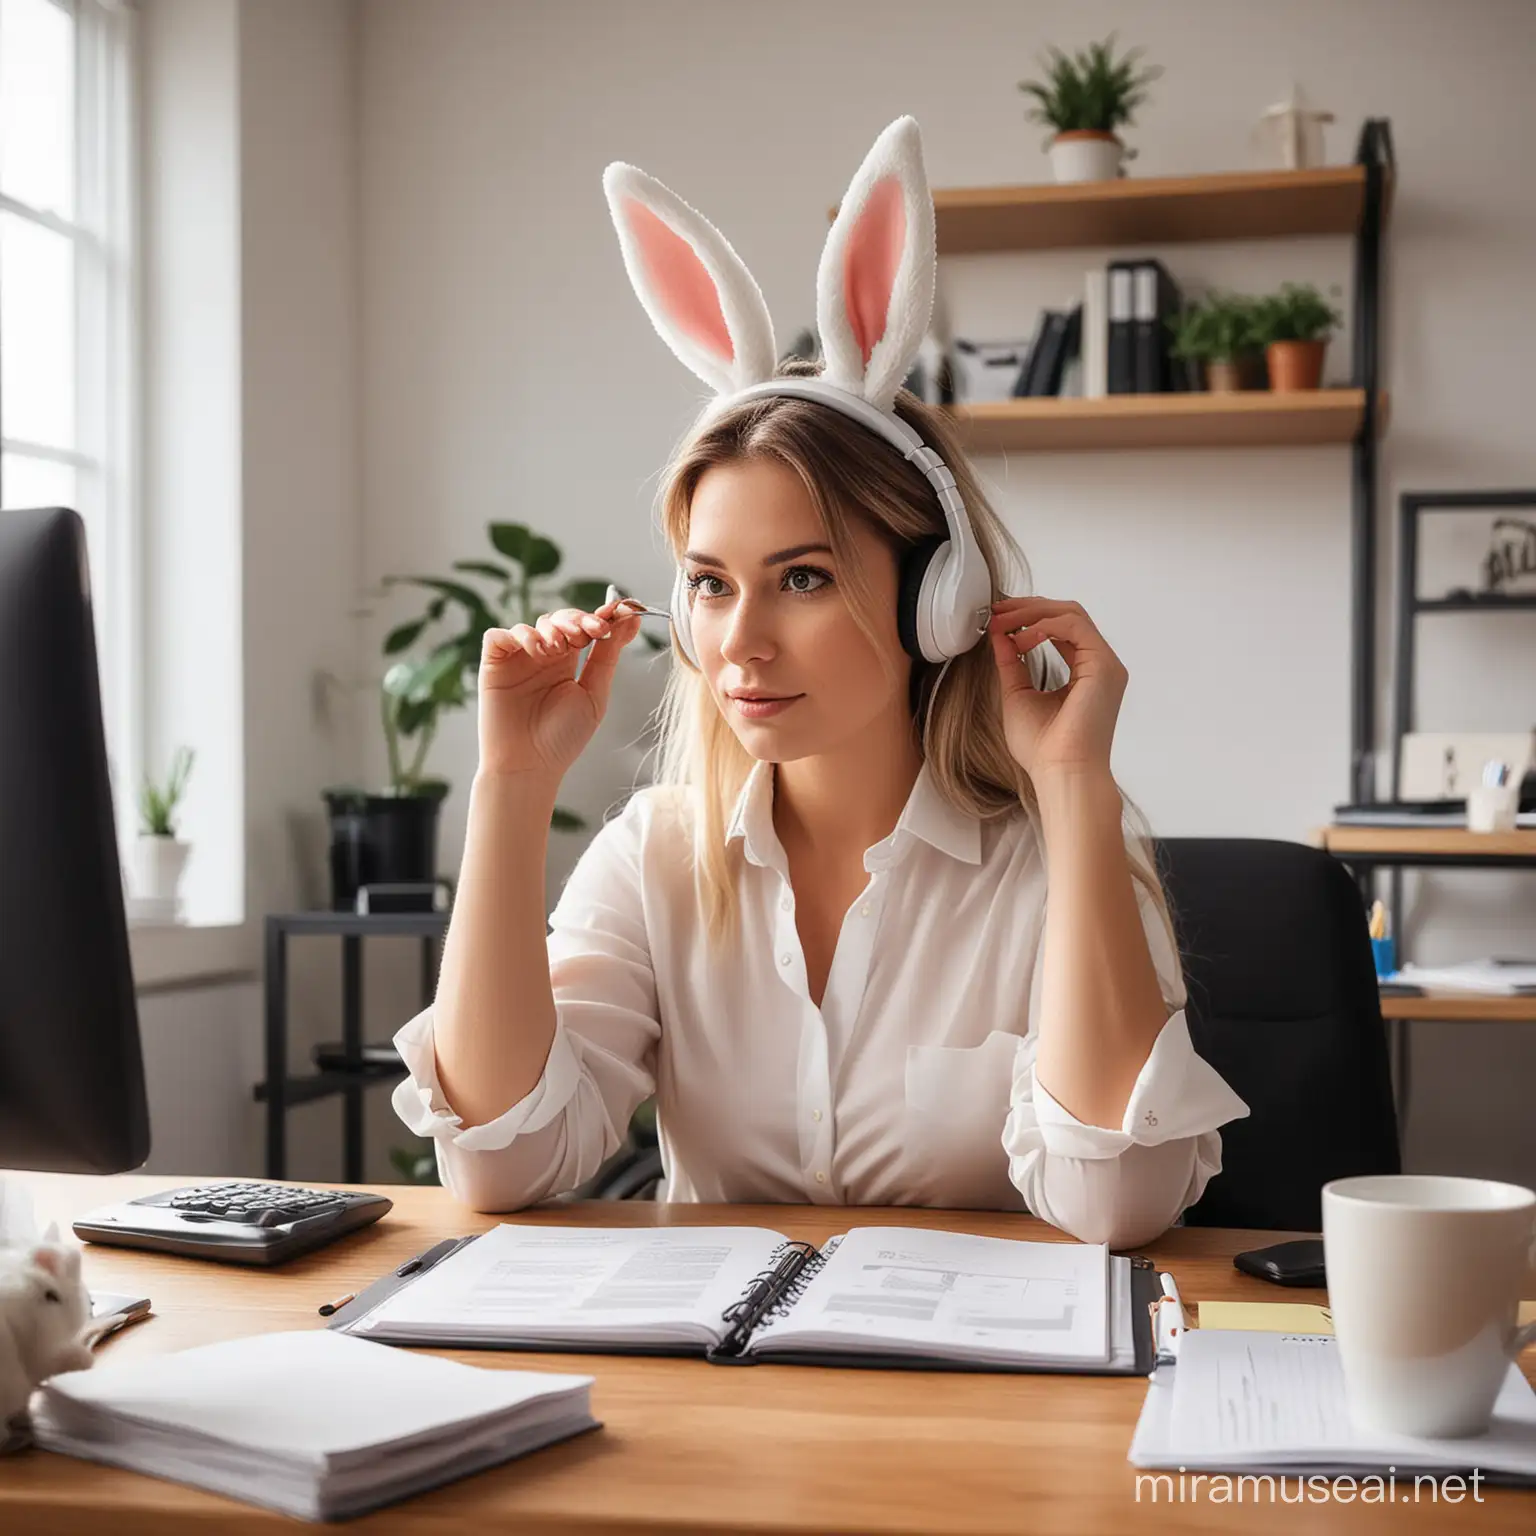 Female Entrepreneur Fully Engaged in Office Tasks with a Playful Bunny